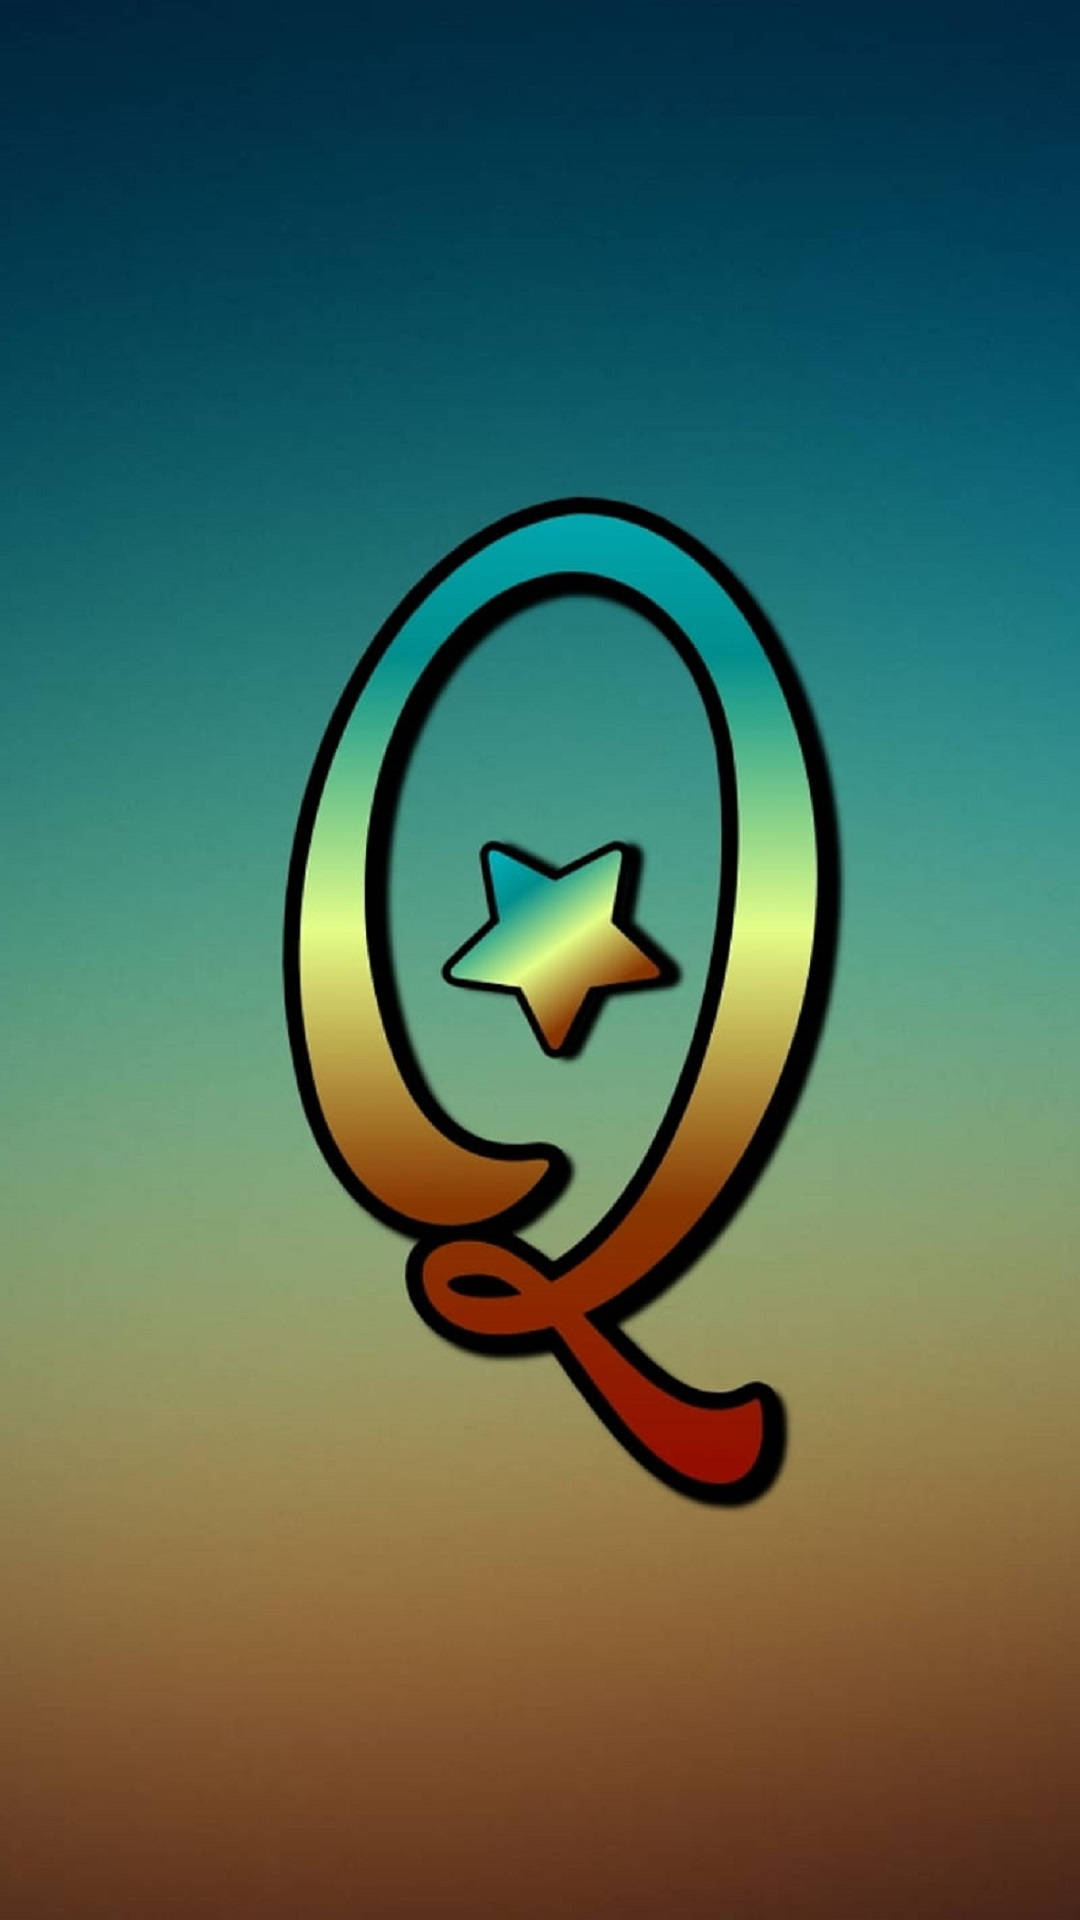 Letter Q With A Star Icon Wallpaper